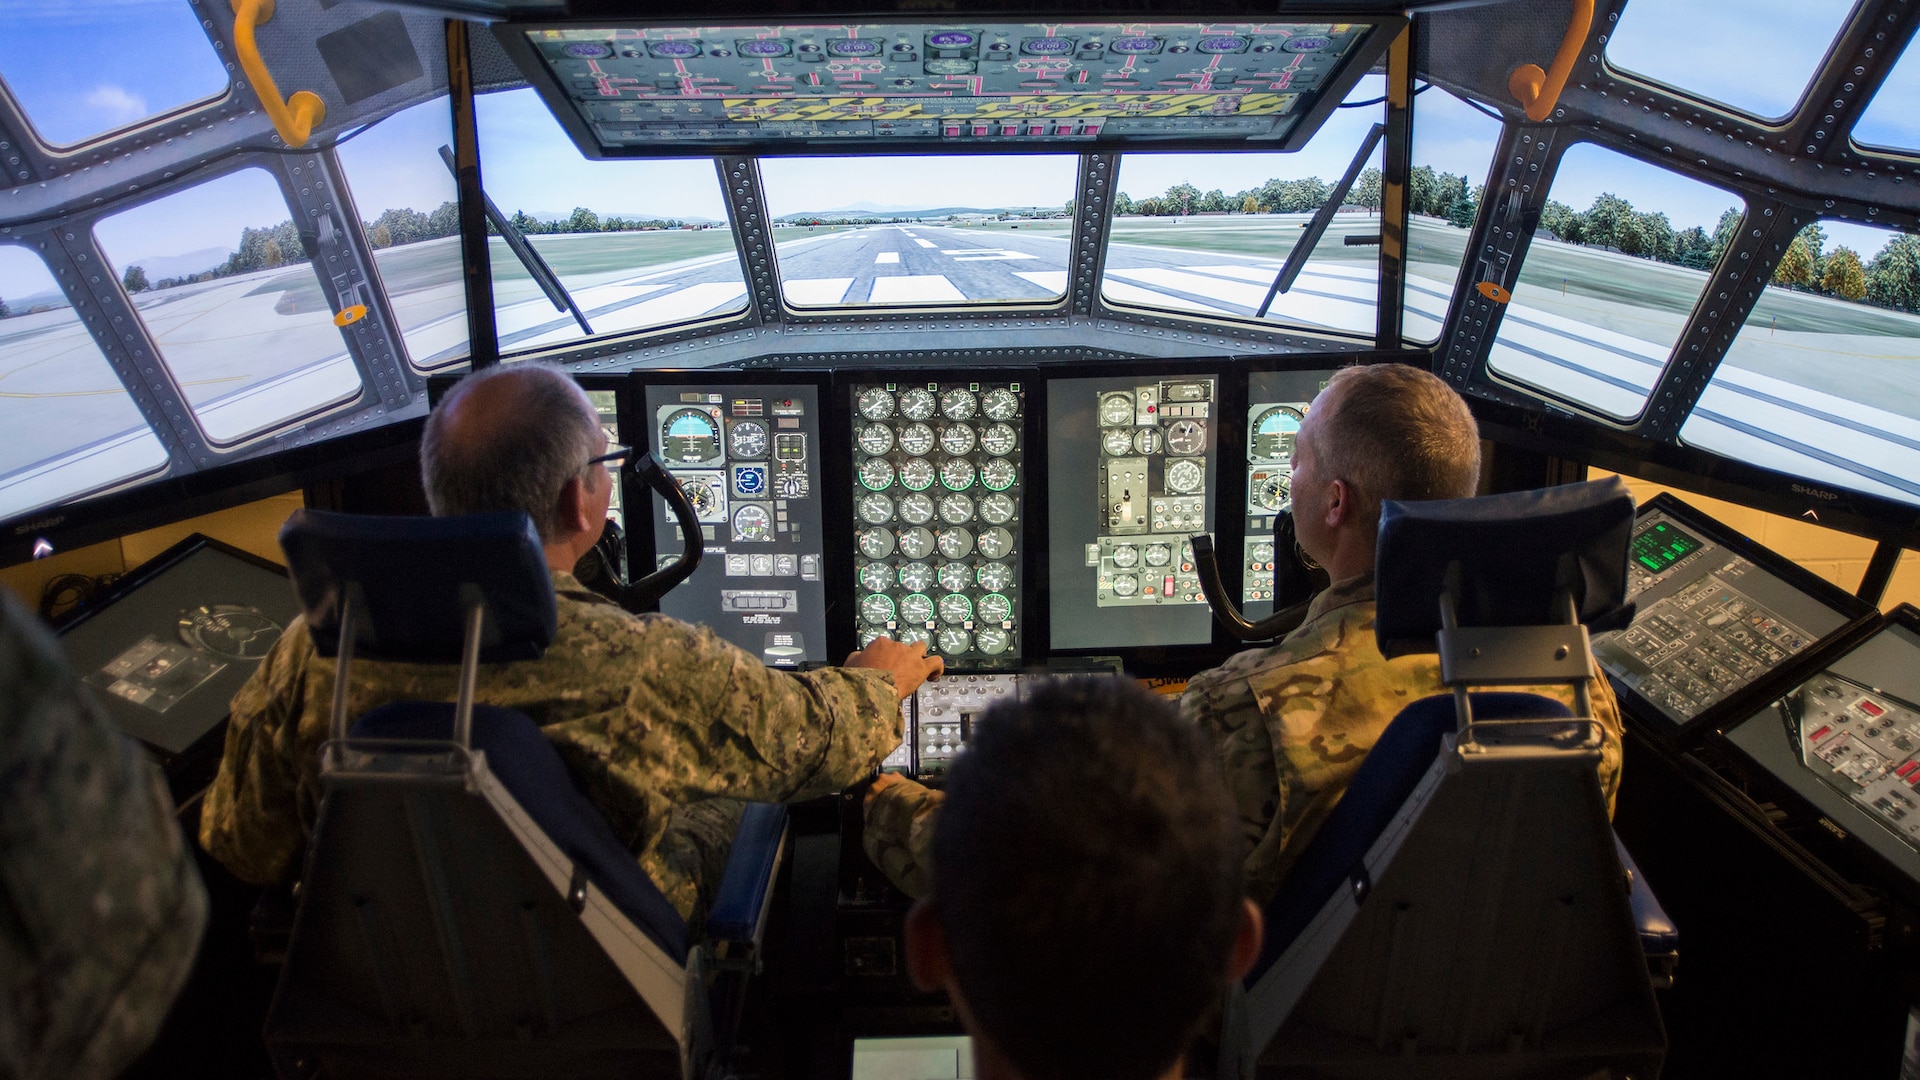 Col. Hugo Parentini, Uruguayan Air Force, and Col. Stephen Gwinn, 103rd Airlift Wing Commander, operate the wing's C-130H Hercules Multi-Mission Crew Trainer (MMCT) during a State Partnership Program visit to Bradley Air National Guard Base, East Granby, Conn. Aug. 15, 2019.